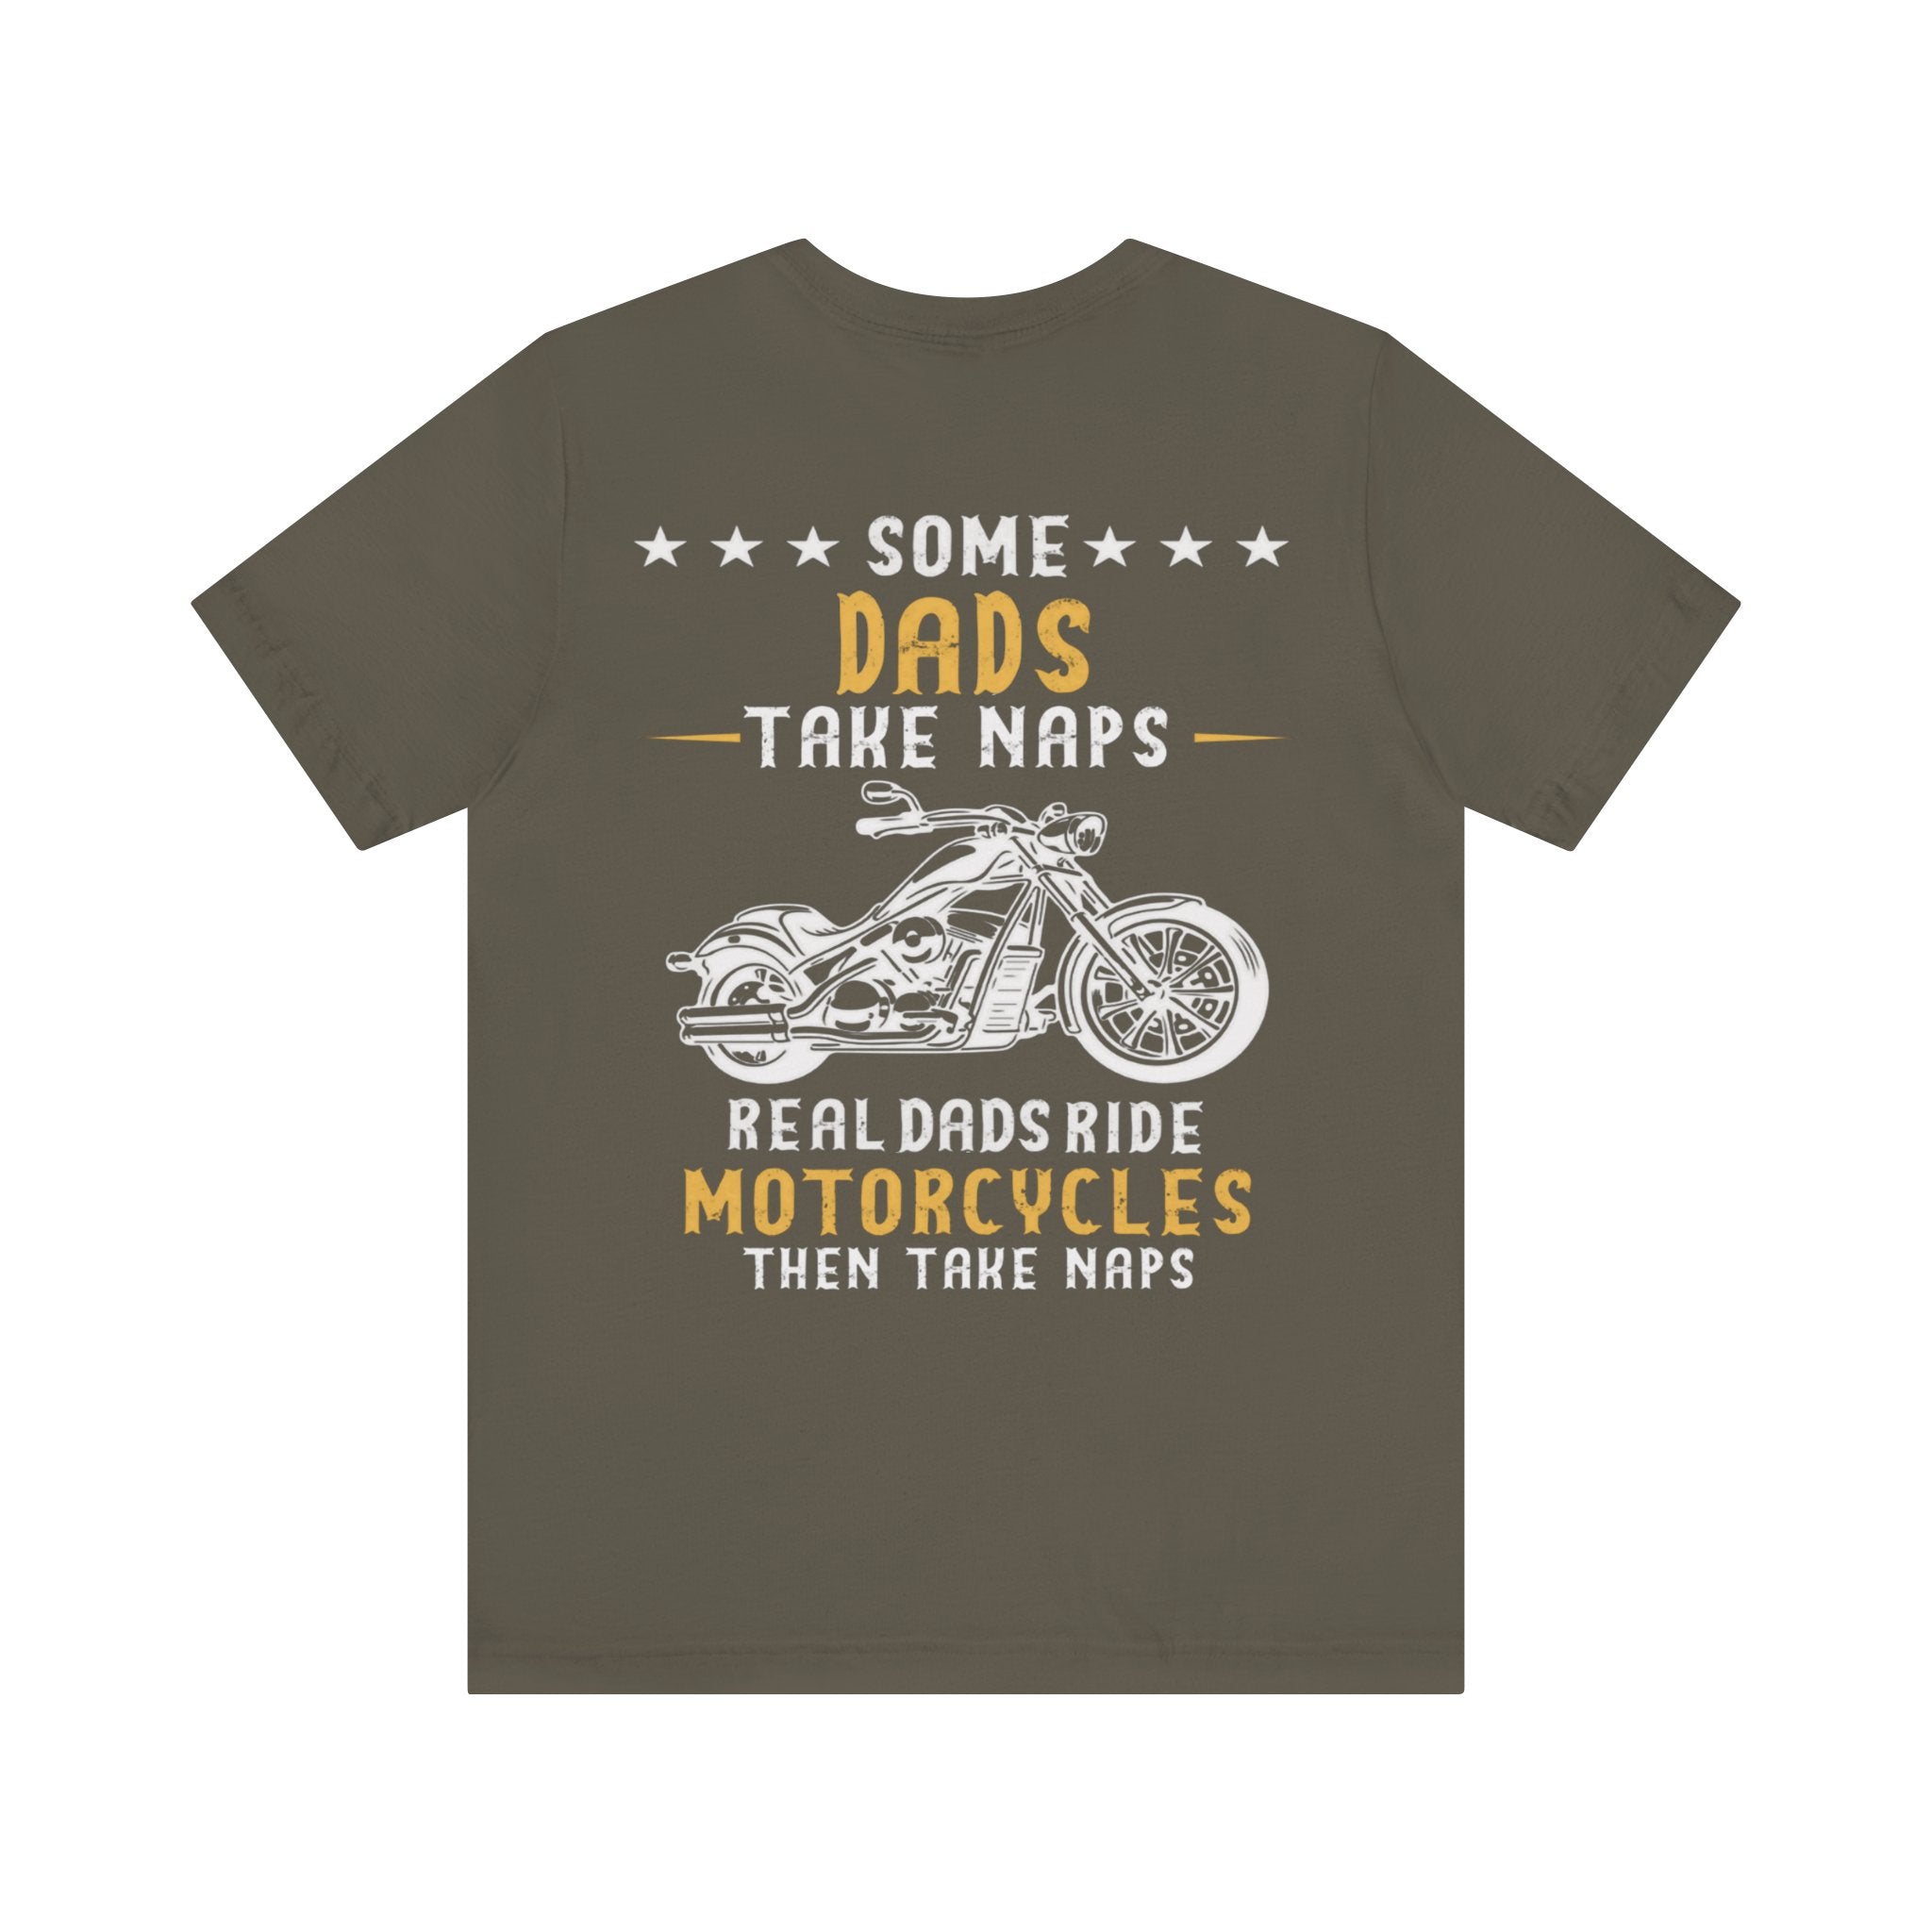 Biker Dad Shirt For Fathers day, Birthday Gift, Real Dads Ride Motorcycles Then Take Naps Shirt, Funny Biker Shirt, Dad Gift